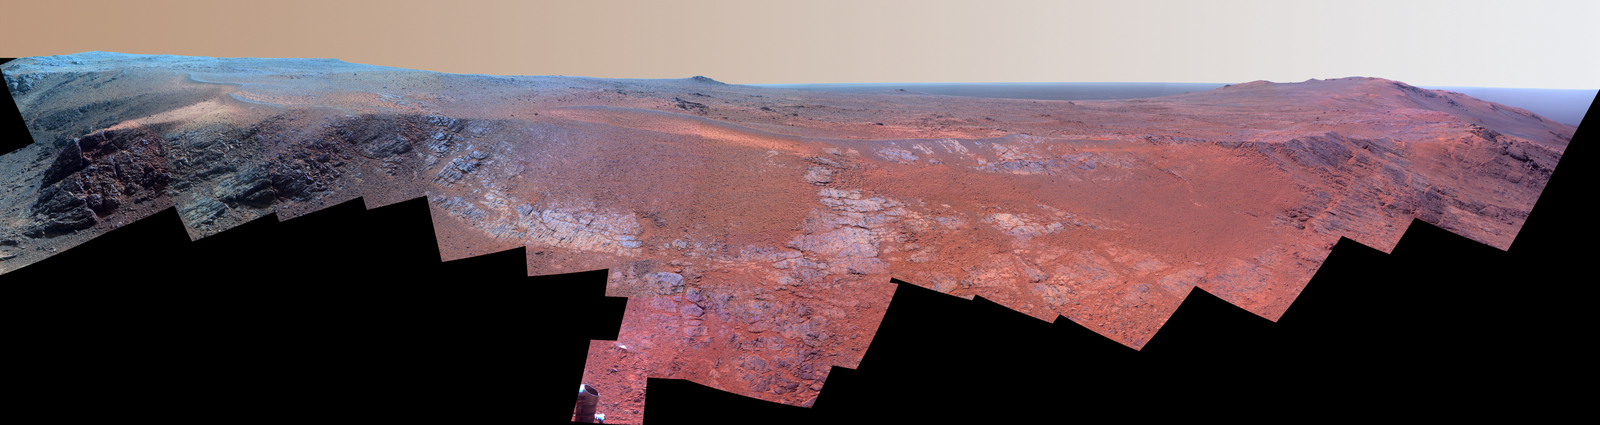 Mars Rover Opportunity's Panorama of 'Rocheport' (Enhanced Color)